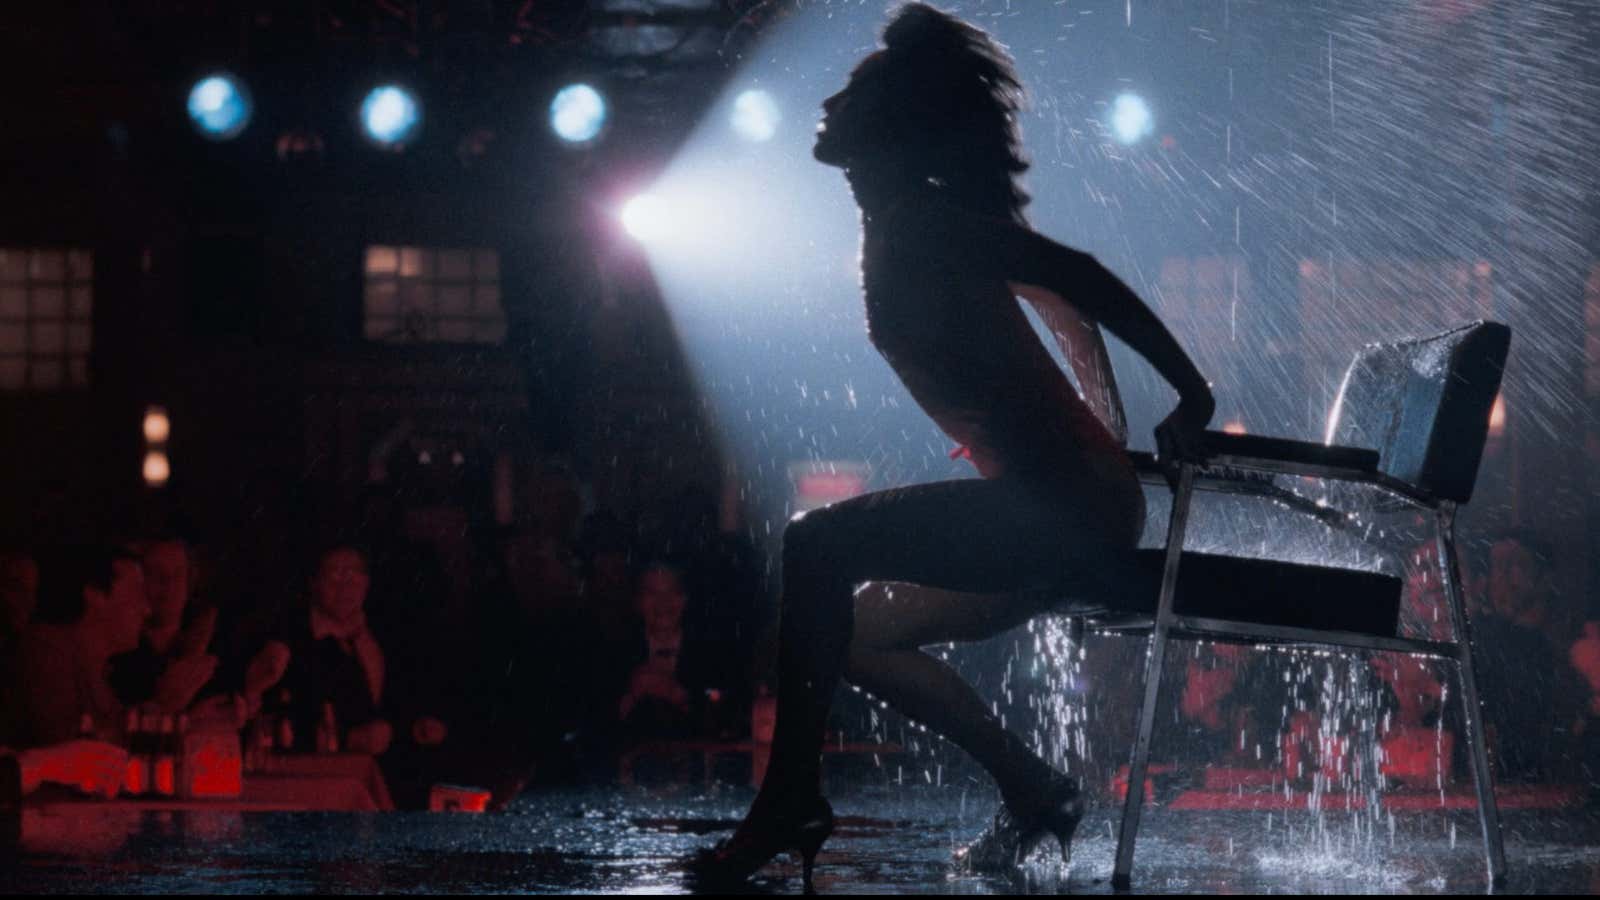 “Flashdance” is getting an update, among other 70s and 80s hits.